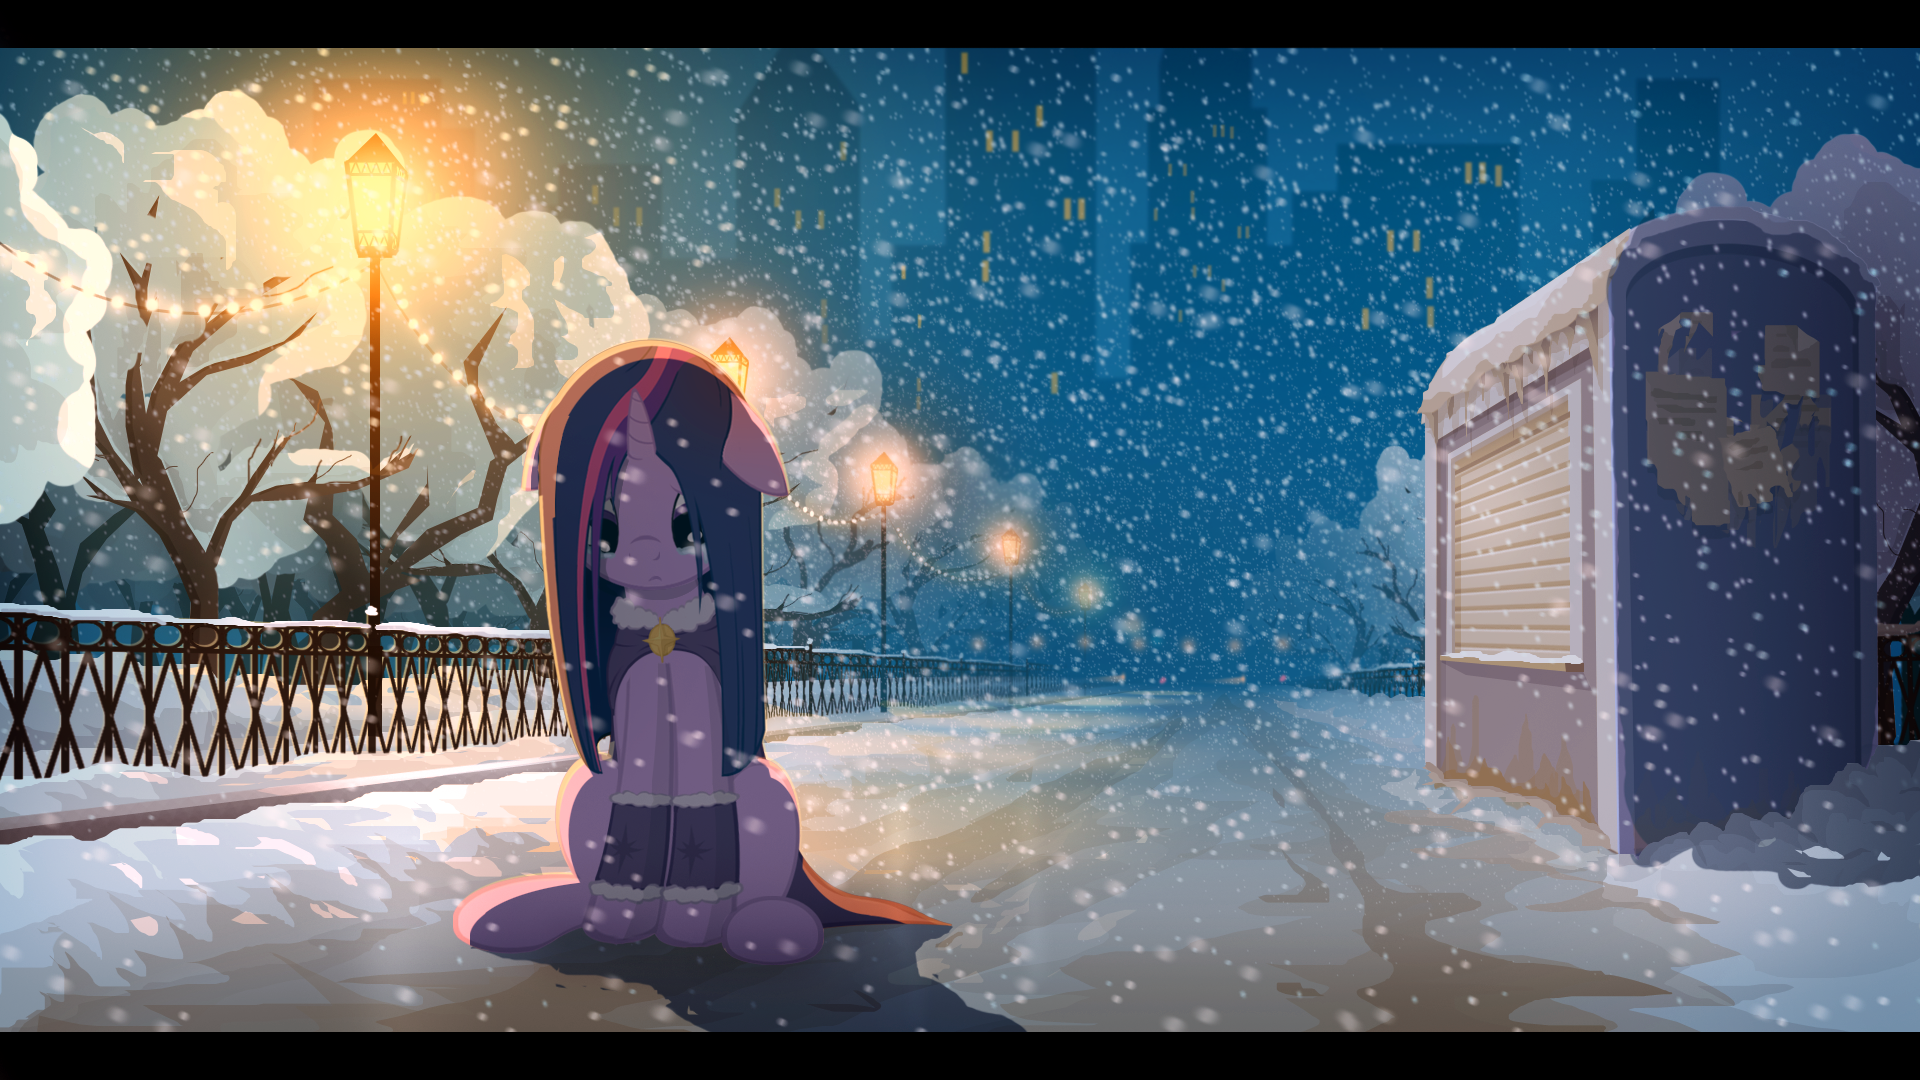 https://derpicdn.net/img/view/2013/11/27/483678__safe_solo_twilight+sparkle_crying_sad_alternate+hairstyle_night_snow_tree_cape.png